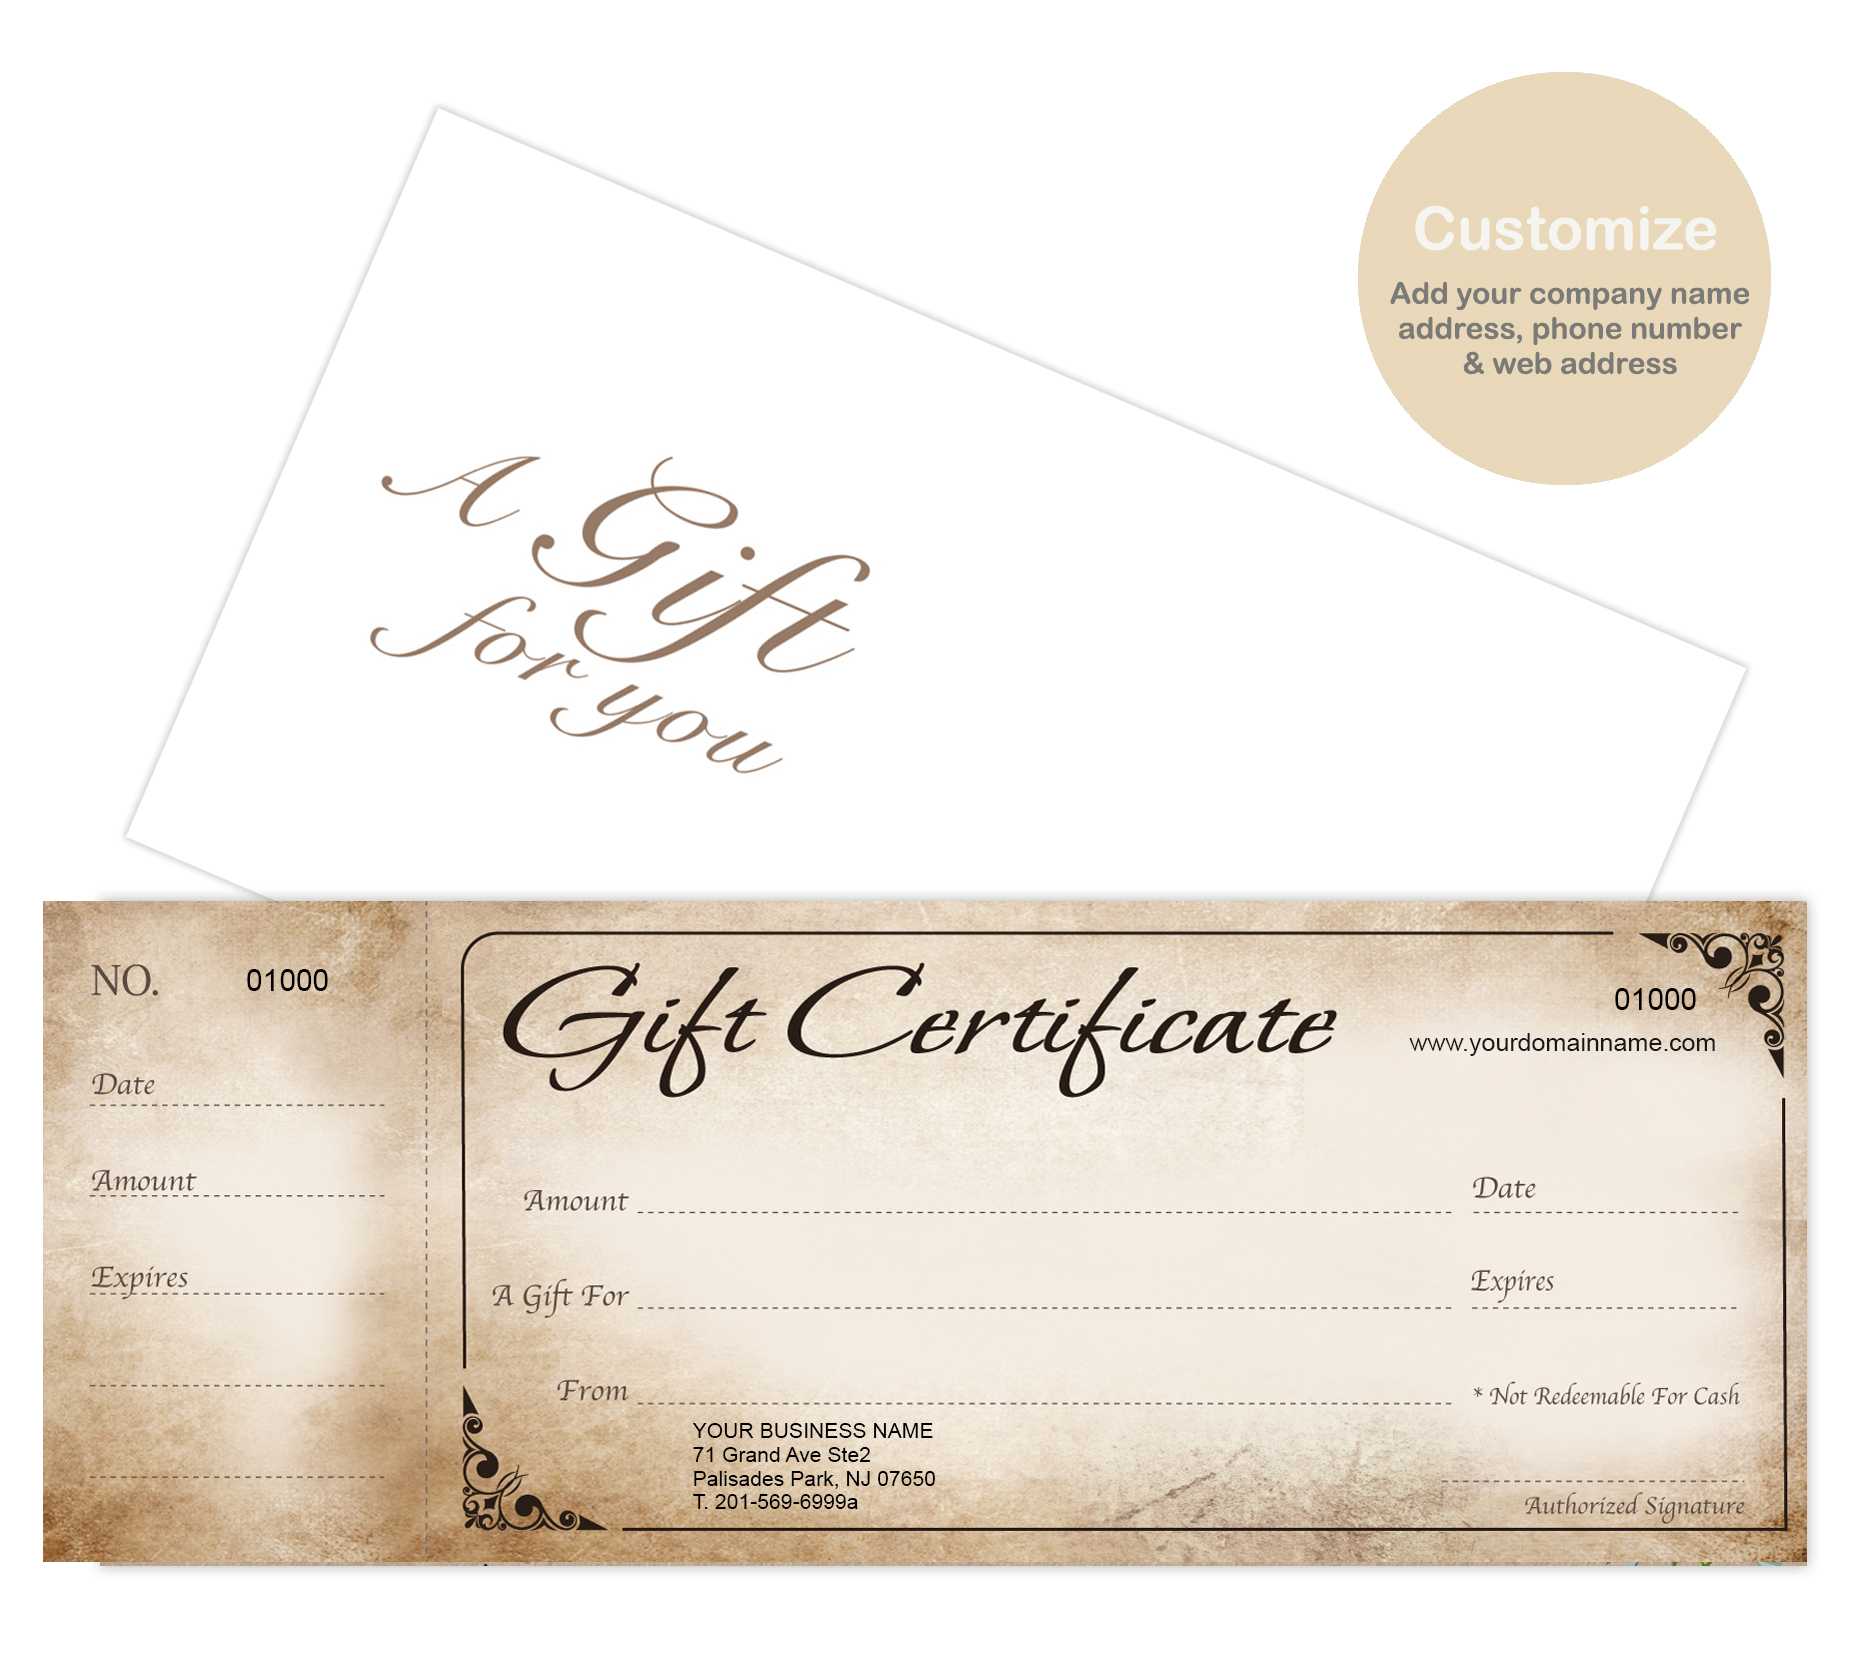 Custom Gift Certificates Cards With Envelopes 100 Set – Rustic With Custom Gift Certificate Template